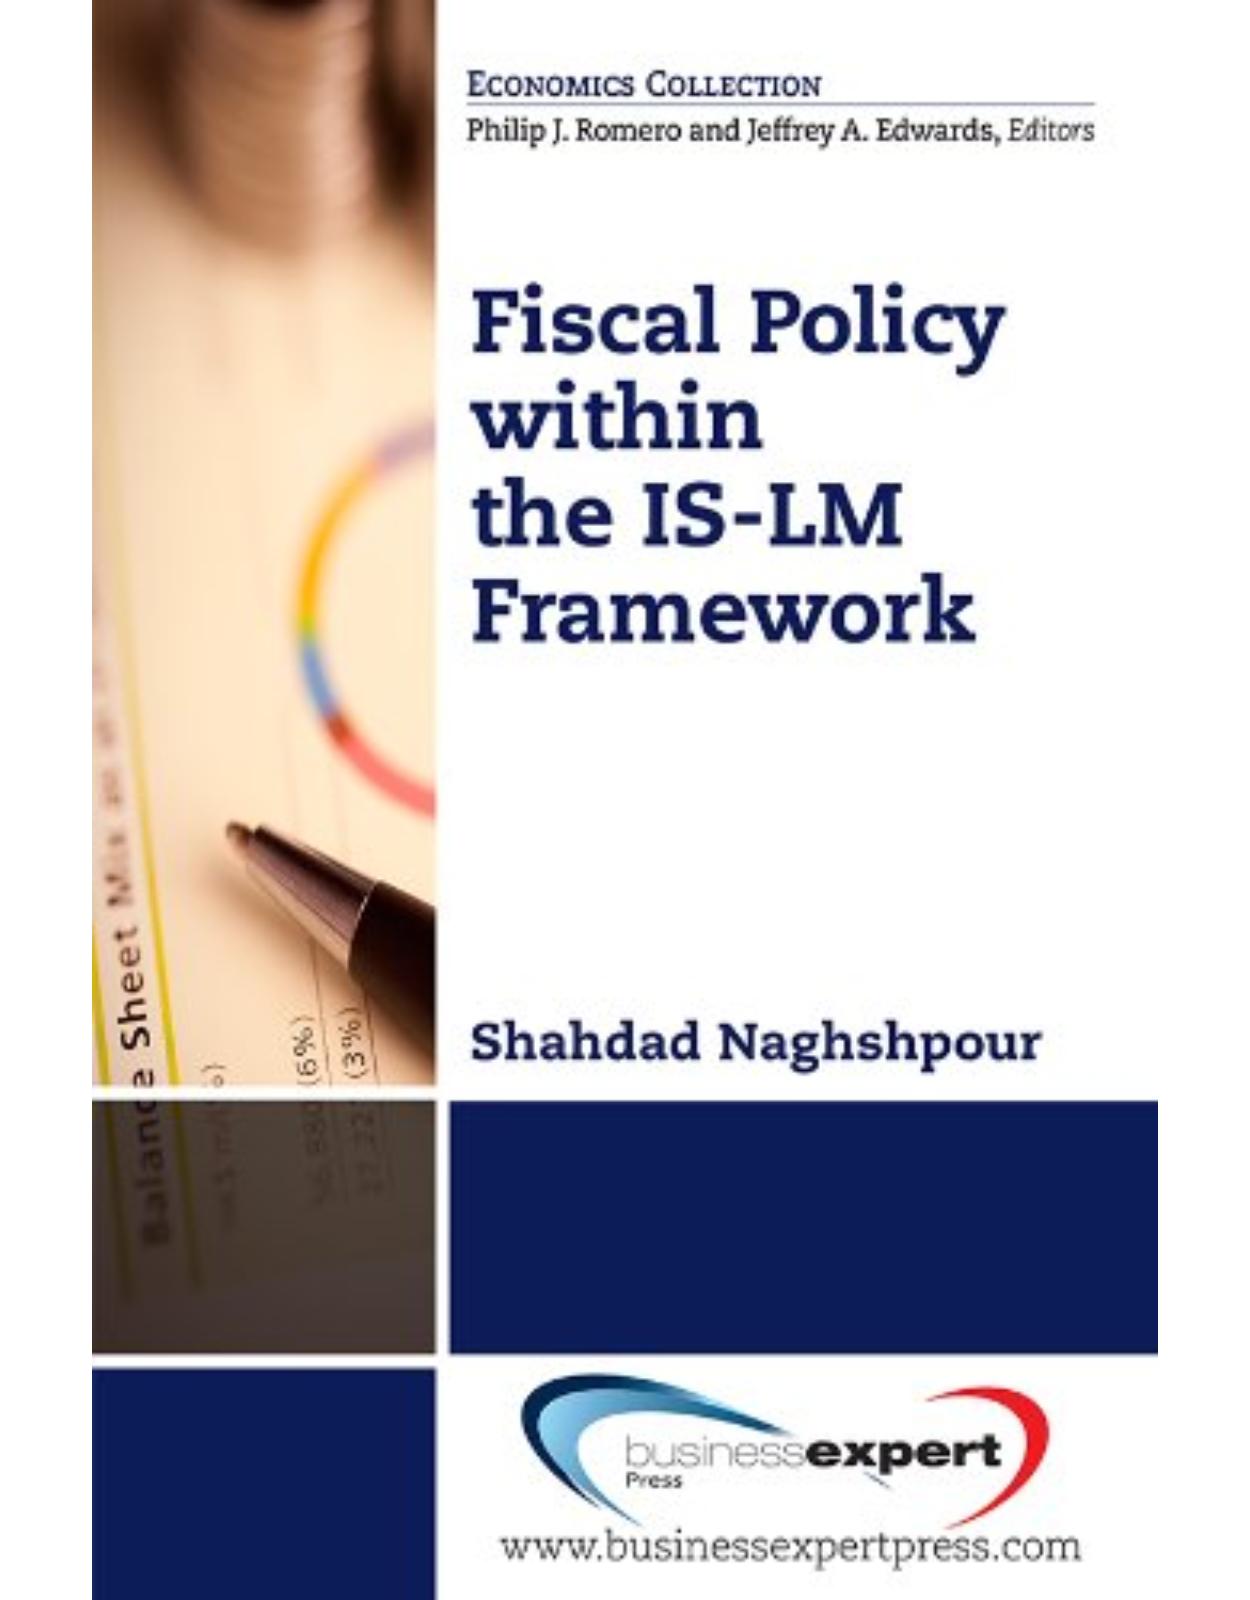 Fiscal Policy: Purposes, Practices, Effectiveness